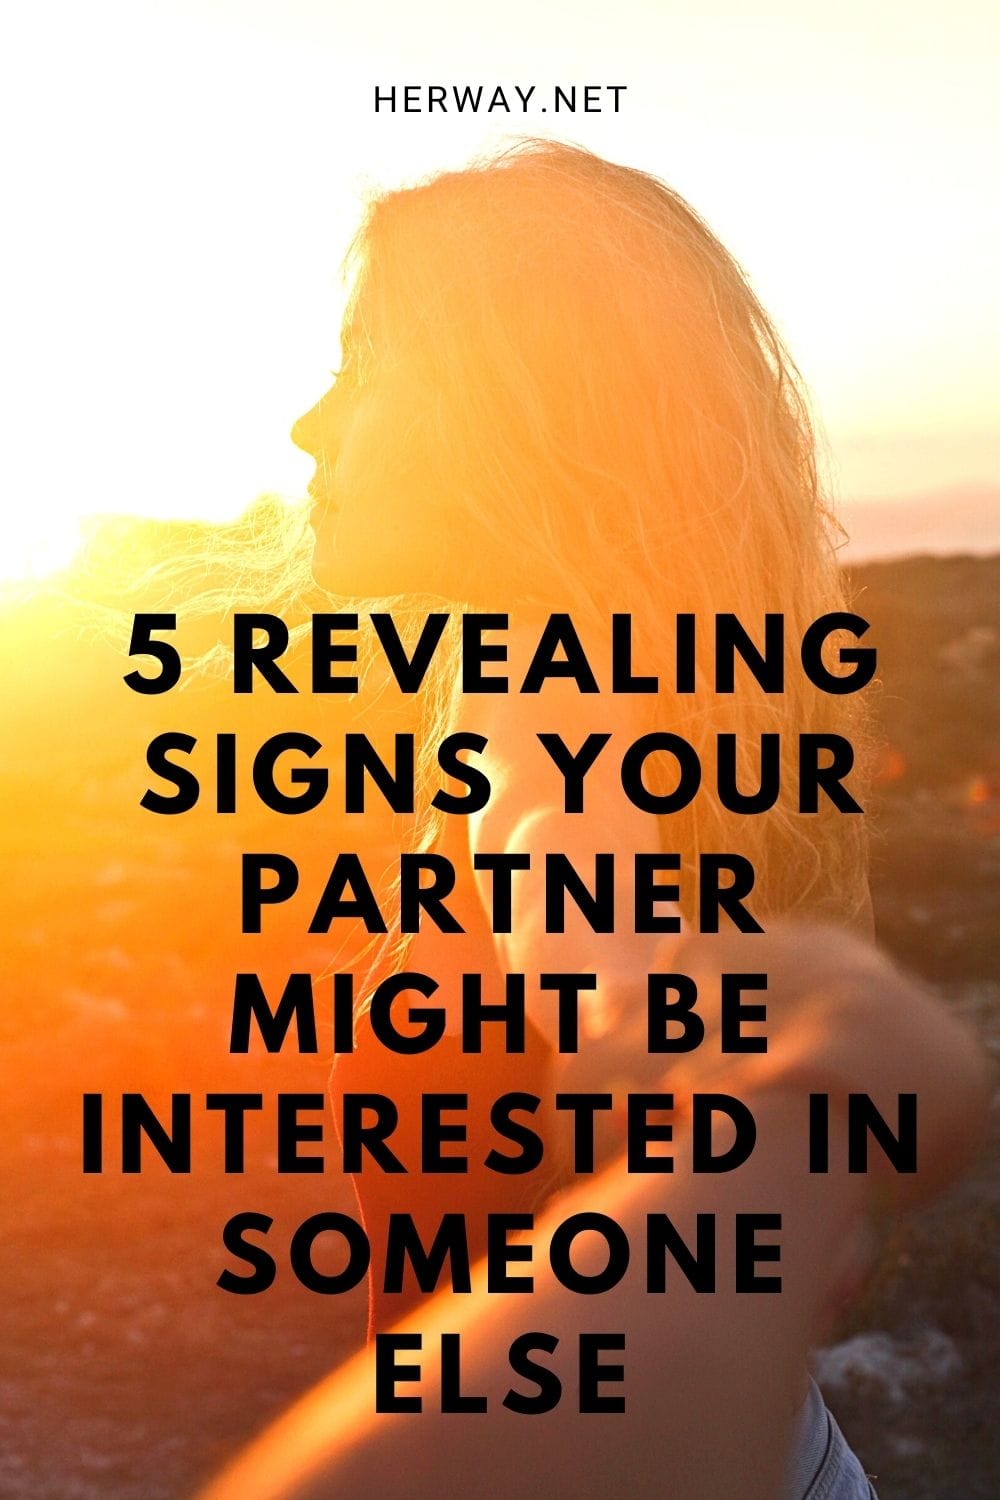 5 Revealing Signs Your Partner Might Be Interested In Someone Else